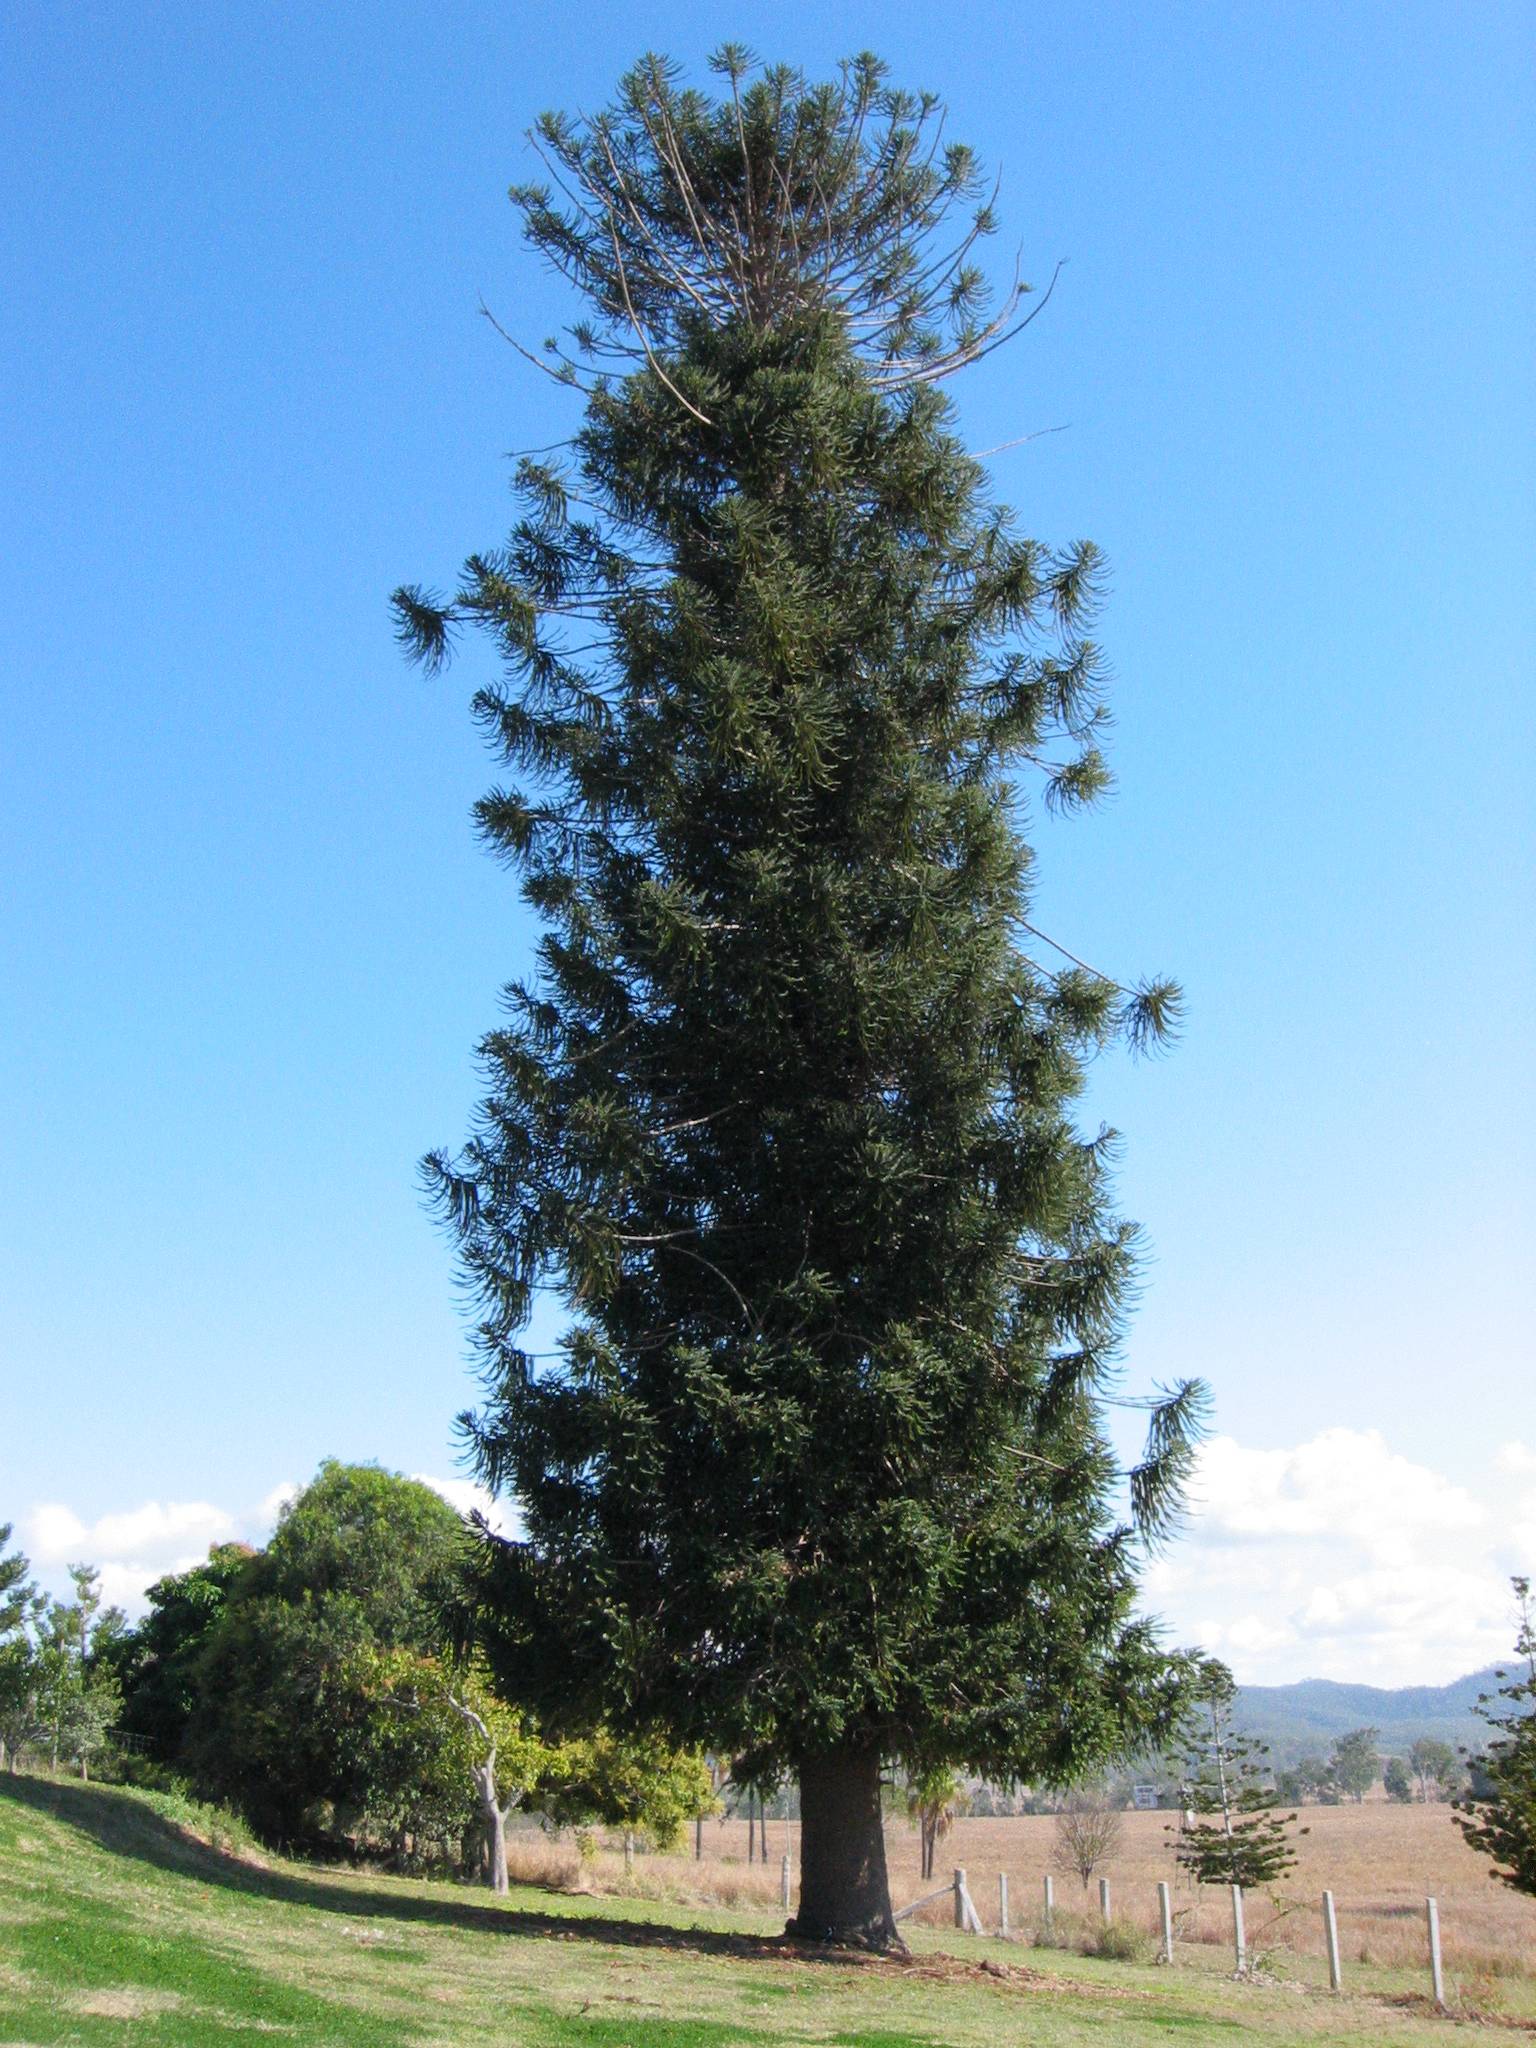 Hoop pine on the grounds. Cockatoos have stripped the top branches.